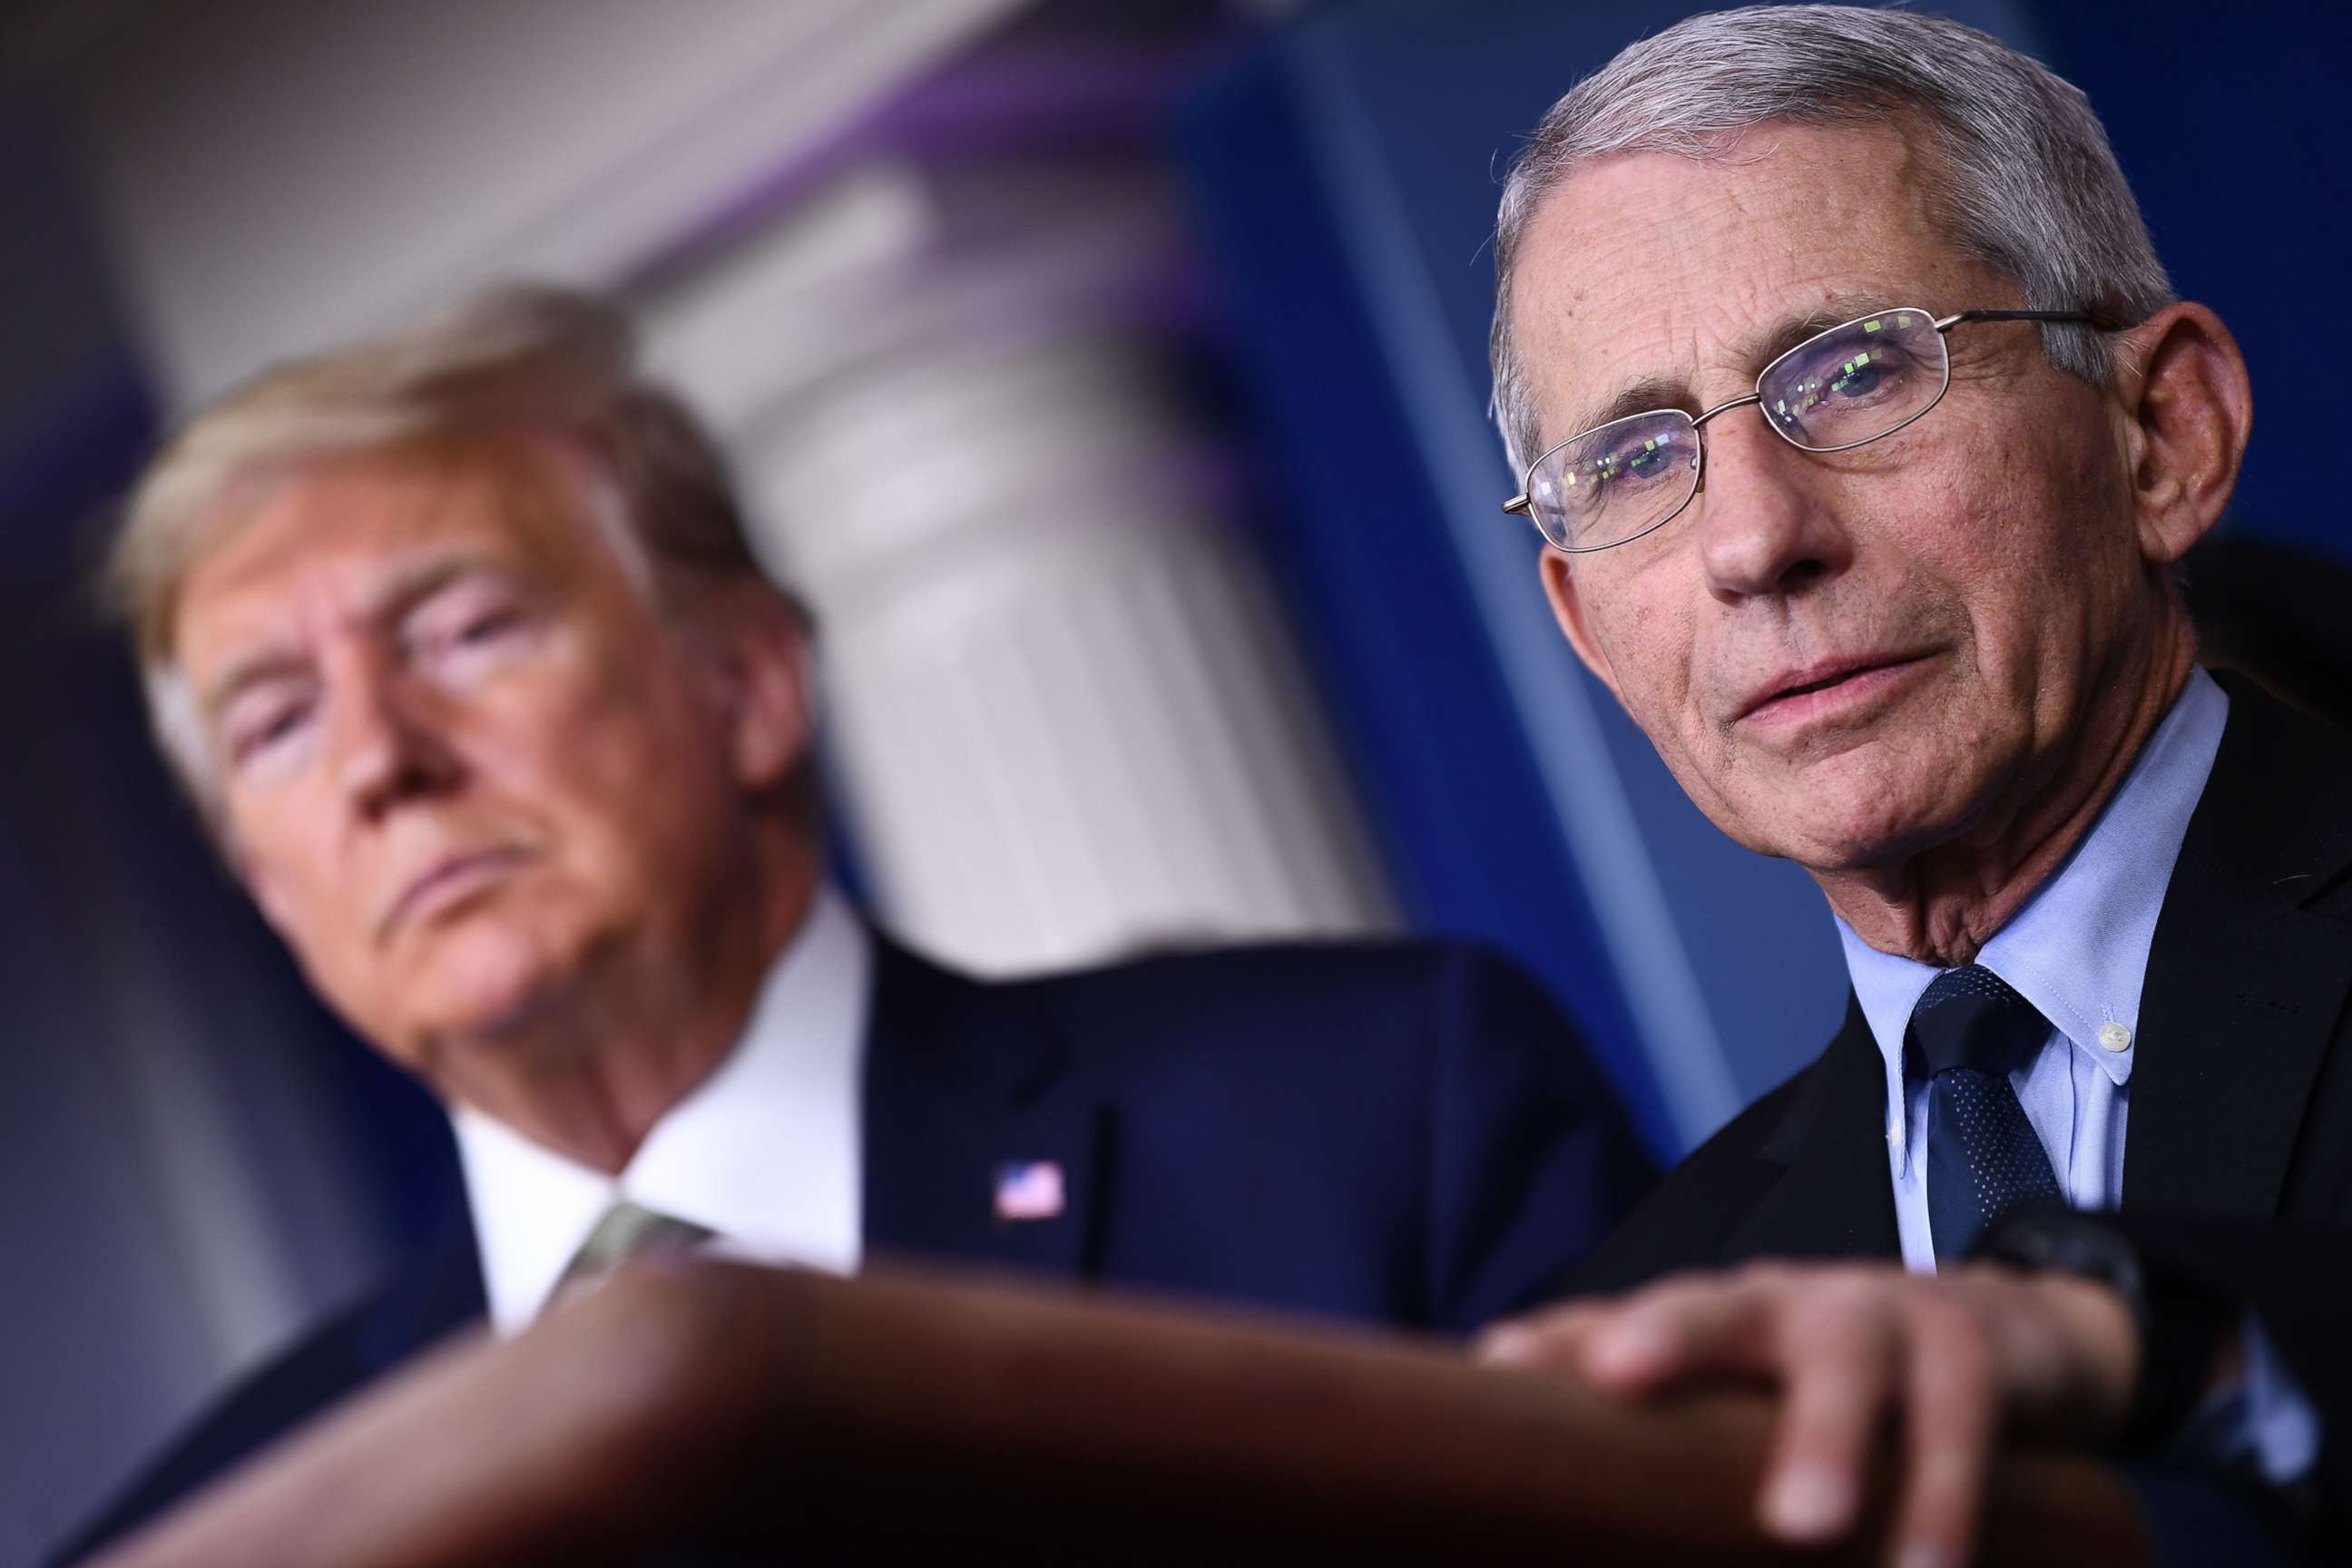 PHOTO: Dr. Anthony Fauci speaks as President Donald Trump listens during the daily press briefing on the Coronavirus pandemic situation at the White House, March 17, 2020.